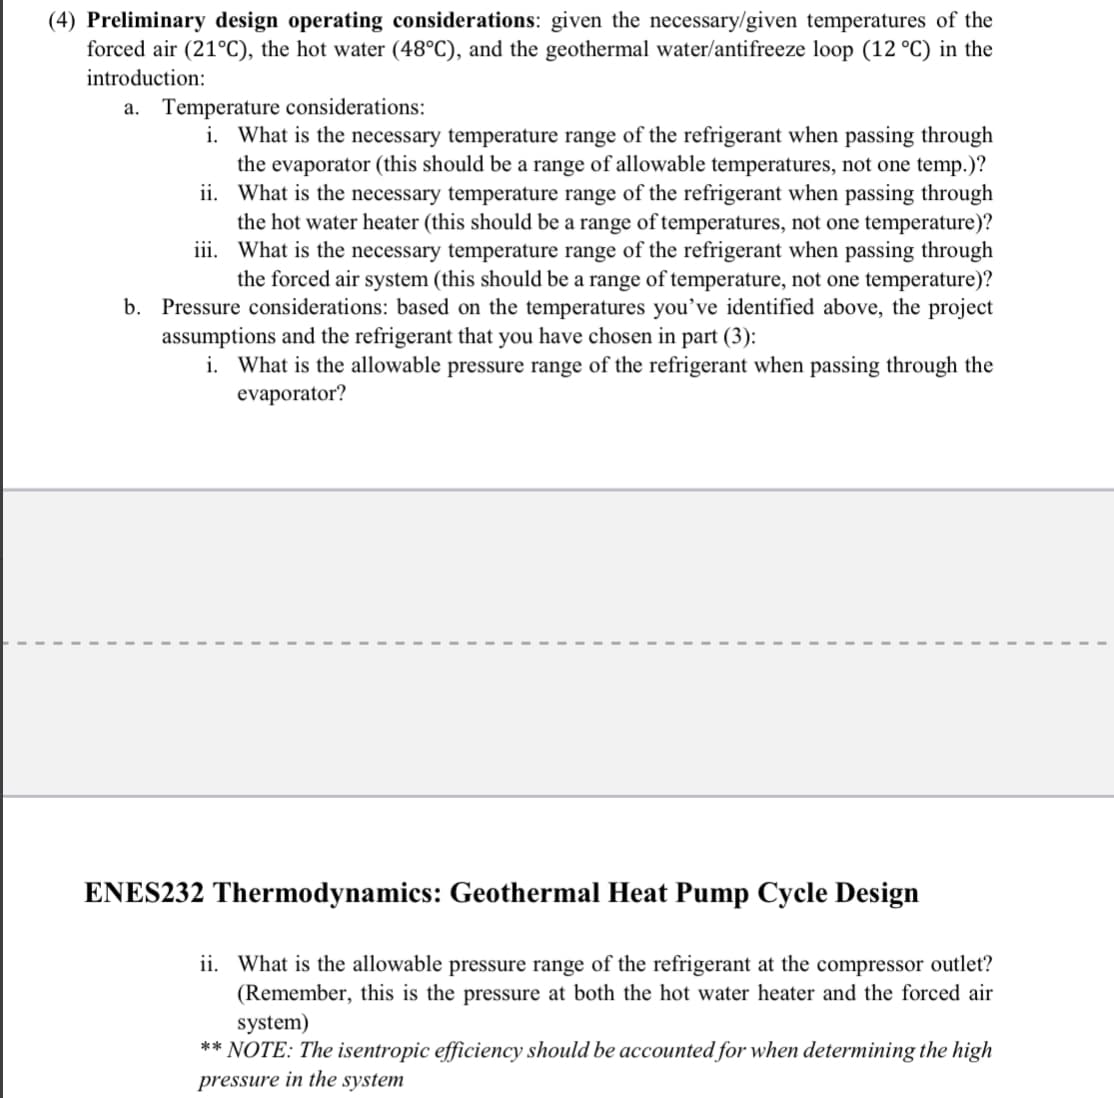 (4) Preliminary design operating considerations: given the necessary/given temperatures of the
forced air (21°C), the hot water (48°C), and the geothermal water/antifreeze loop (12 °C) in the
introduction:
a. Temperature considerations:
i. What is the necessary temperature range of the refrigerant when passing through
the evaporator (this should be a range of allowable temperatures, not one temp.)?
ii. What is the necessary temperature range of the refrigerant when passing through
the hot water heater (this should be a range of temperatures, not one temperature)?
iii. What is the necessary temperature range of the refrigerant when passing through
the forced air system (this should be a range of temperature, not one temperature)?
b. Pressure considerations: based on the temperatures you've identified above, the project
assumptions and the refrigerant that you have chosen in part (3):
i. What is the allowable pressure range of the refrigerant when passing through the
evaporator?
ENES232 Thermodynamics: Geothermal Heat Pump Cycle Design
ii. What is the allowable pressure range of the refrigerant at the compressor outlet?
(Remember, this is the pressure at both the hot water heater and the forced air
system)
** NOTE: The isentropic efficiency should be accounted for when determining the high
pressure in the system